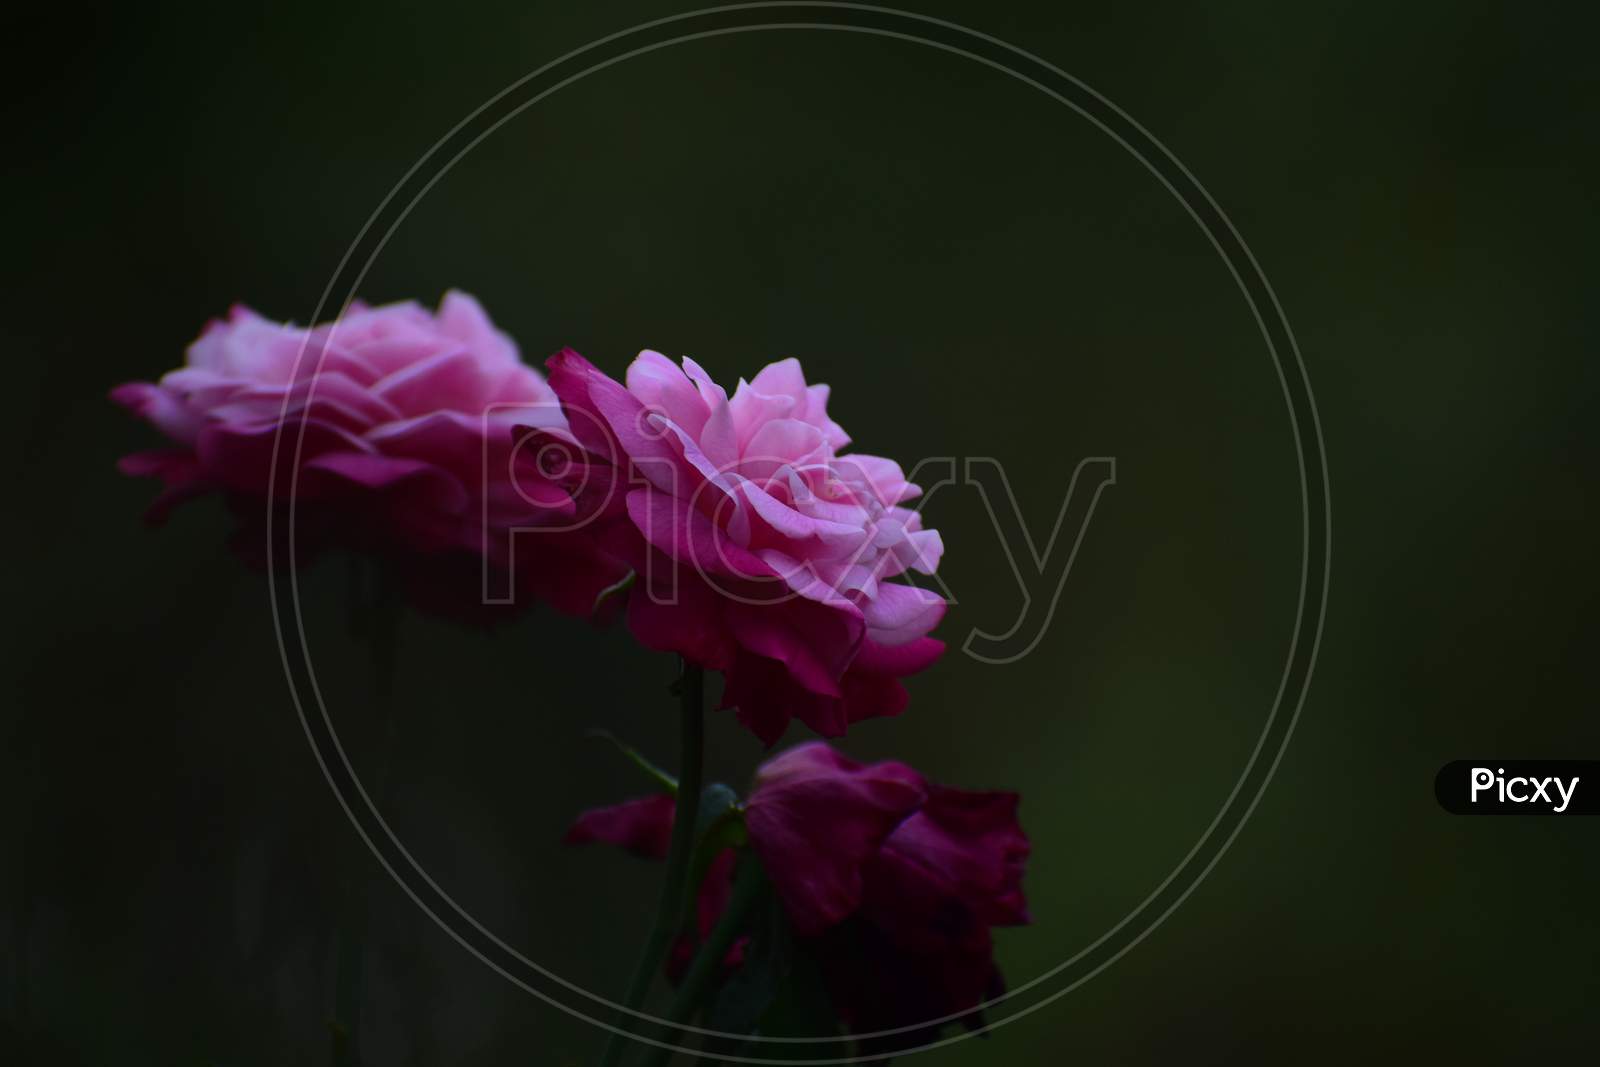 A red and pink tone rose with dark background.